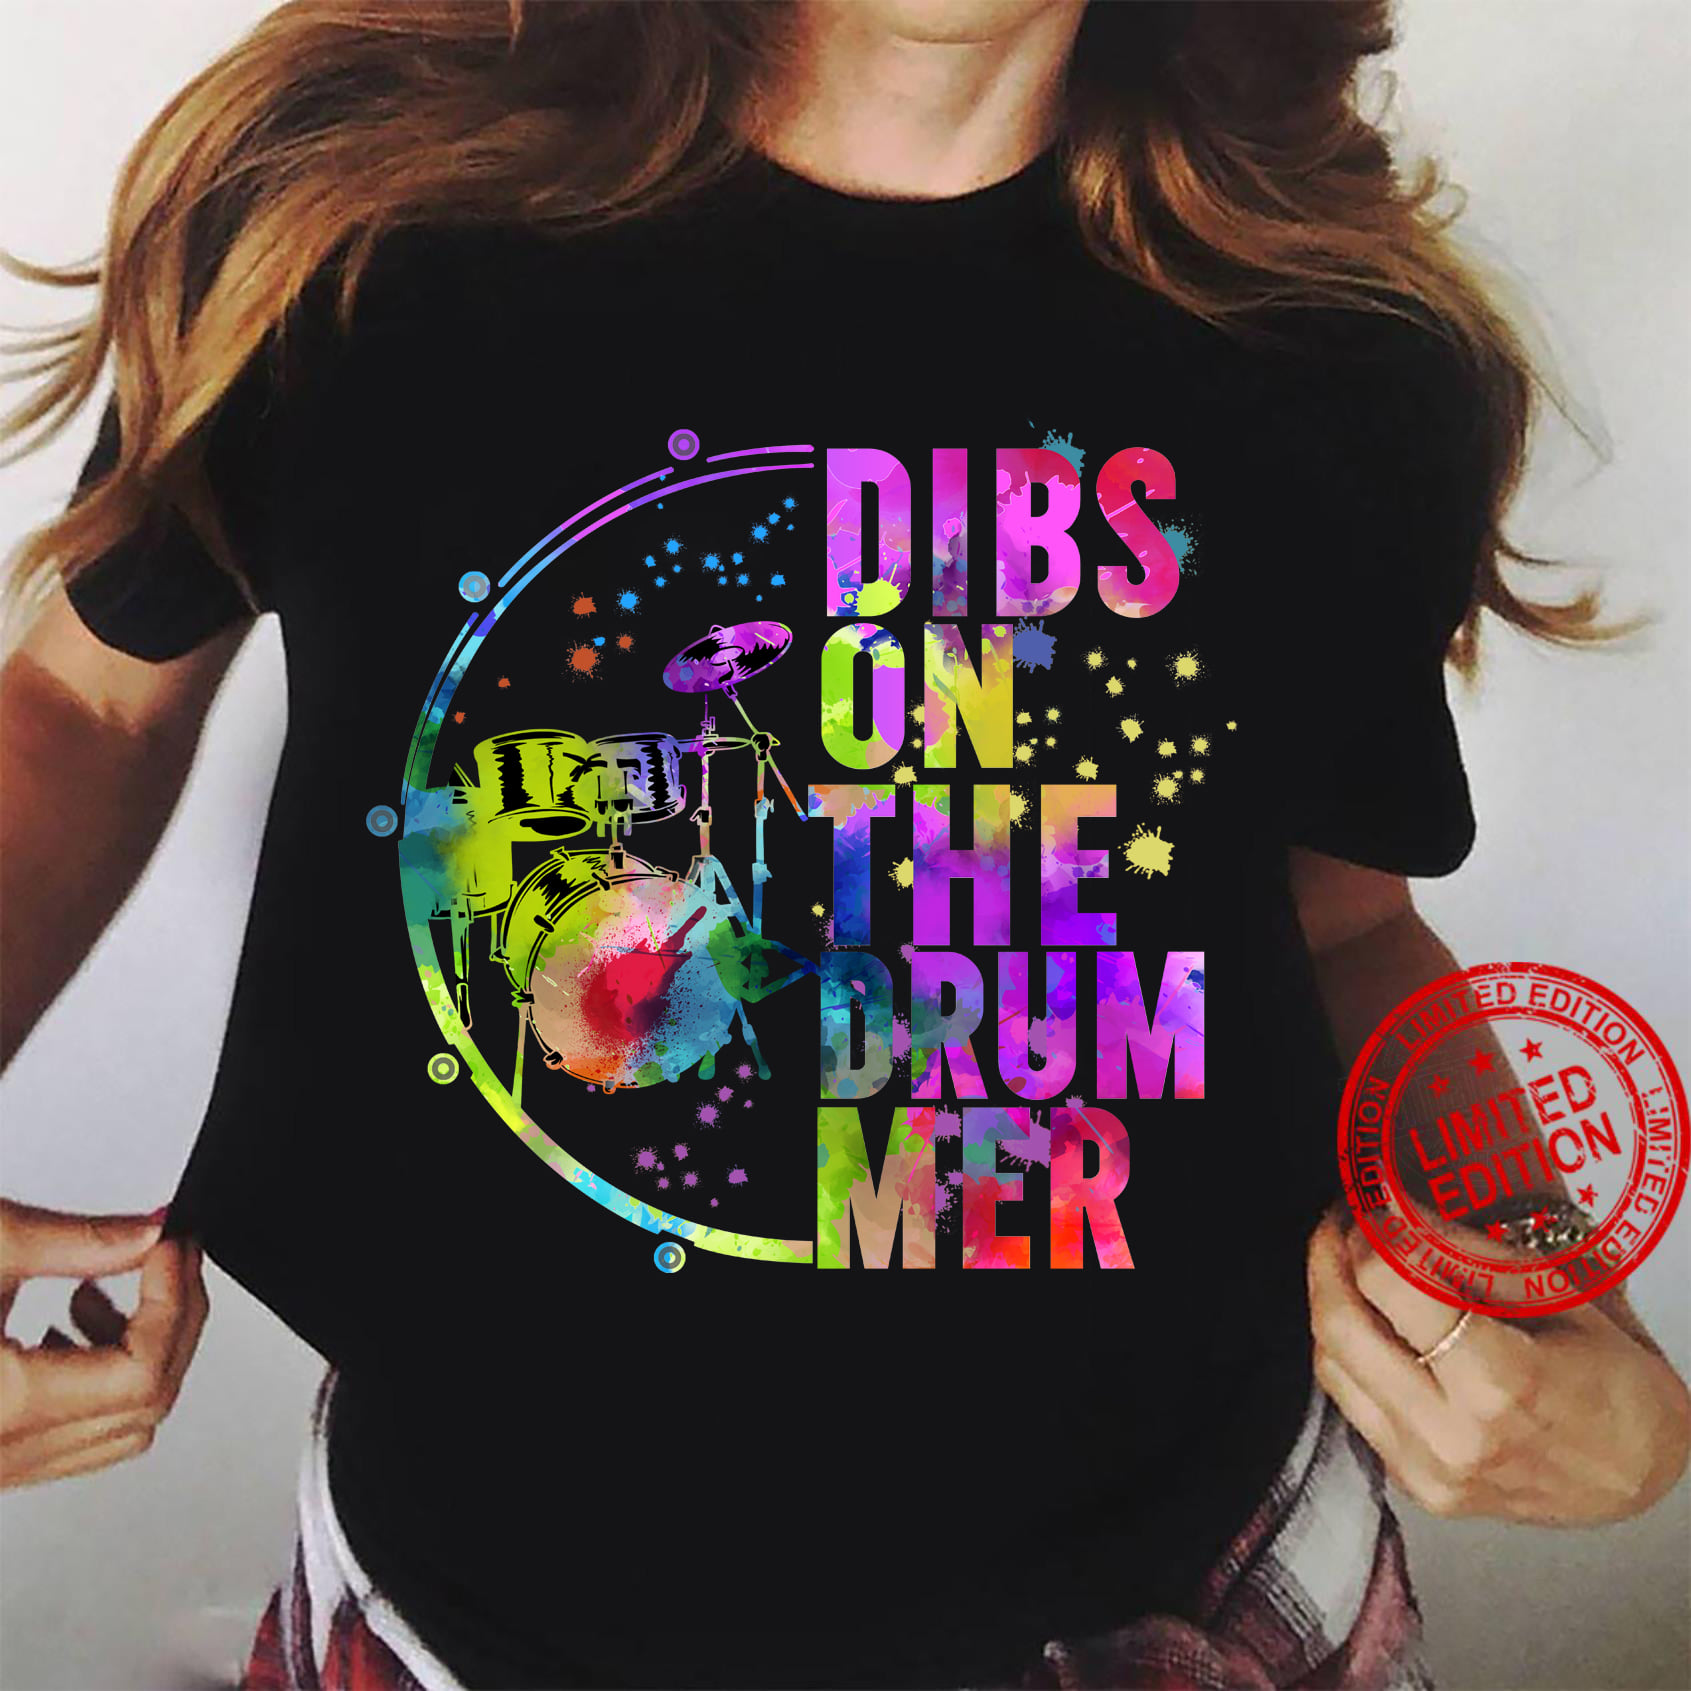 Dibs on the drummer - Love playing drum